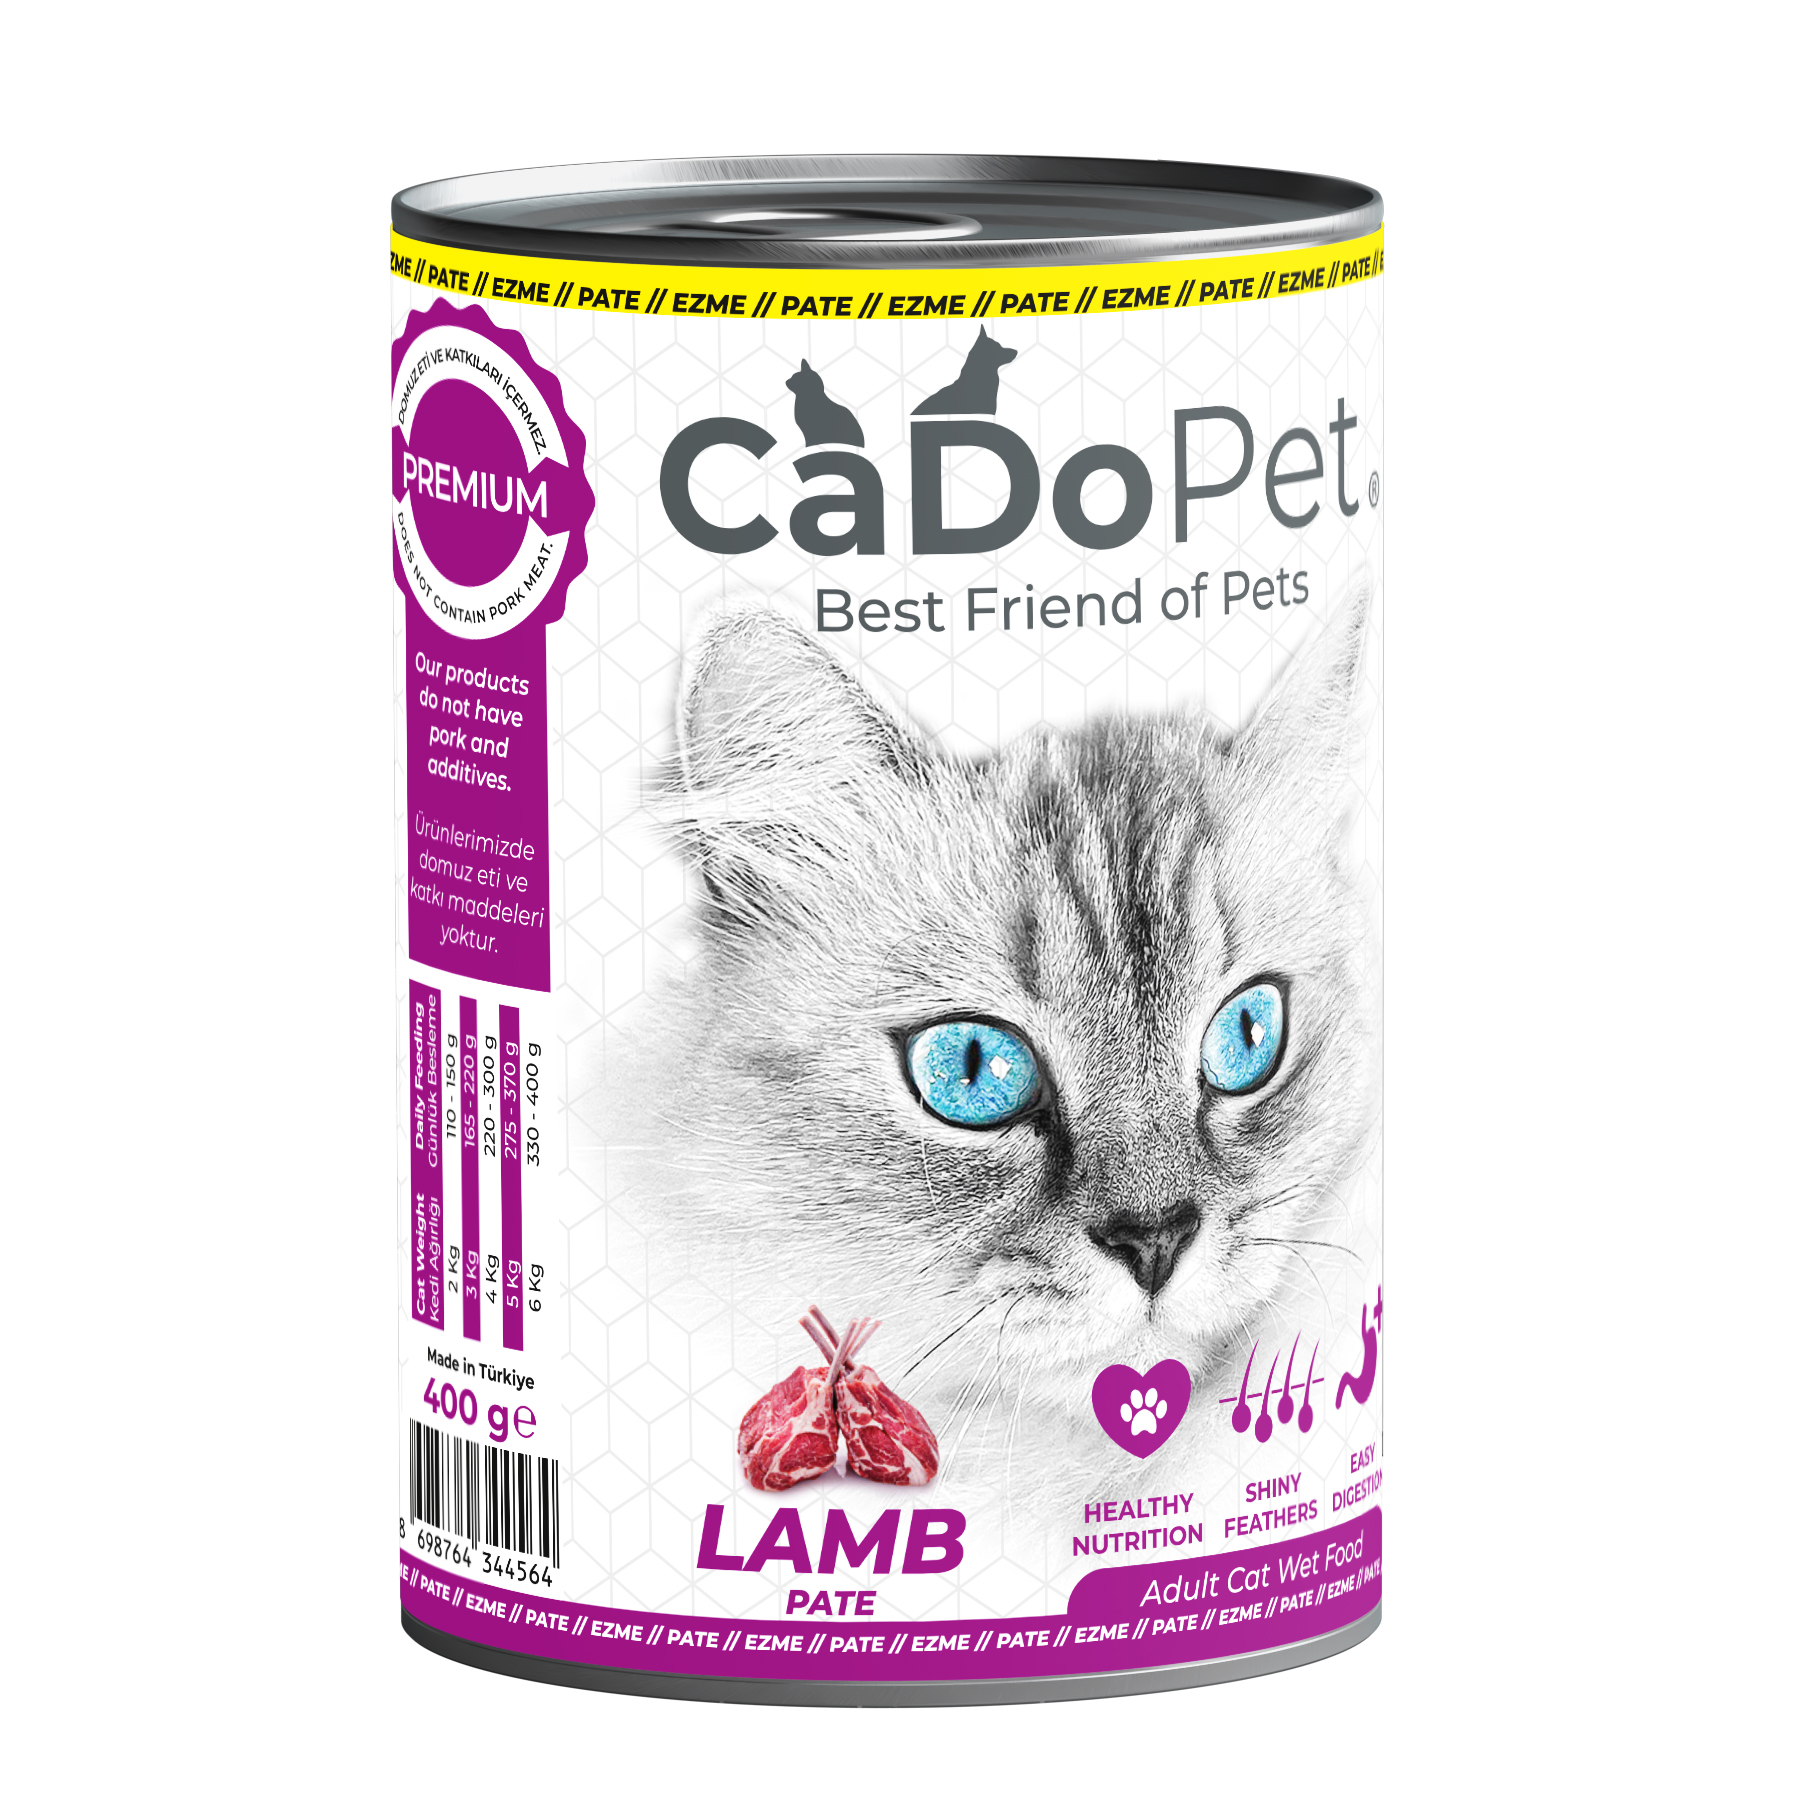 .Adult Cat Wet Food 400g with Lamb Pate.